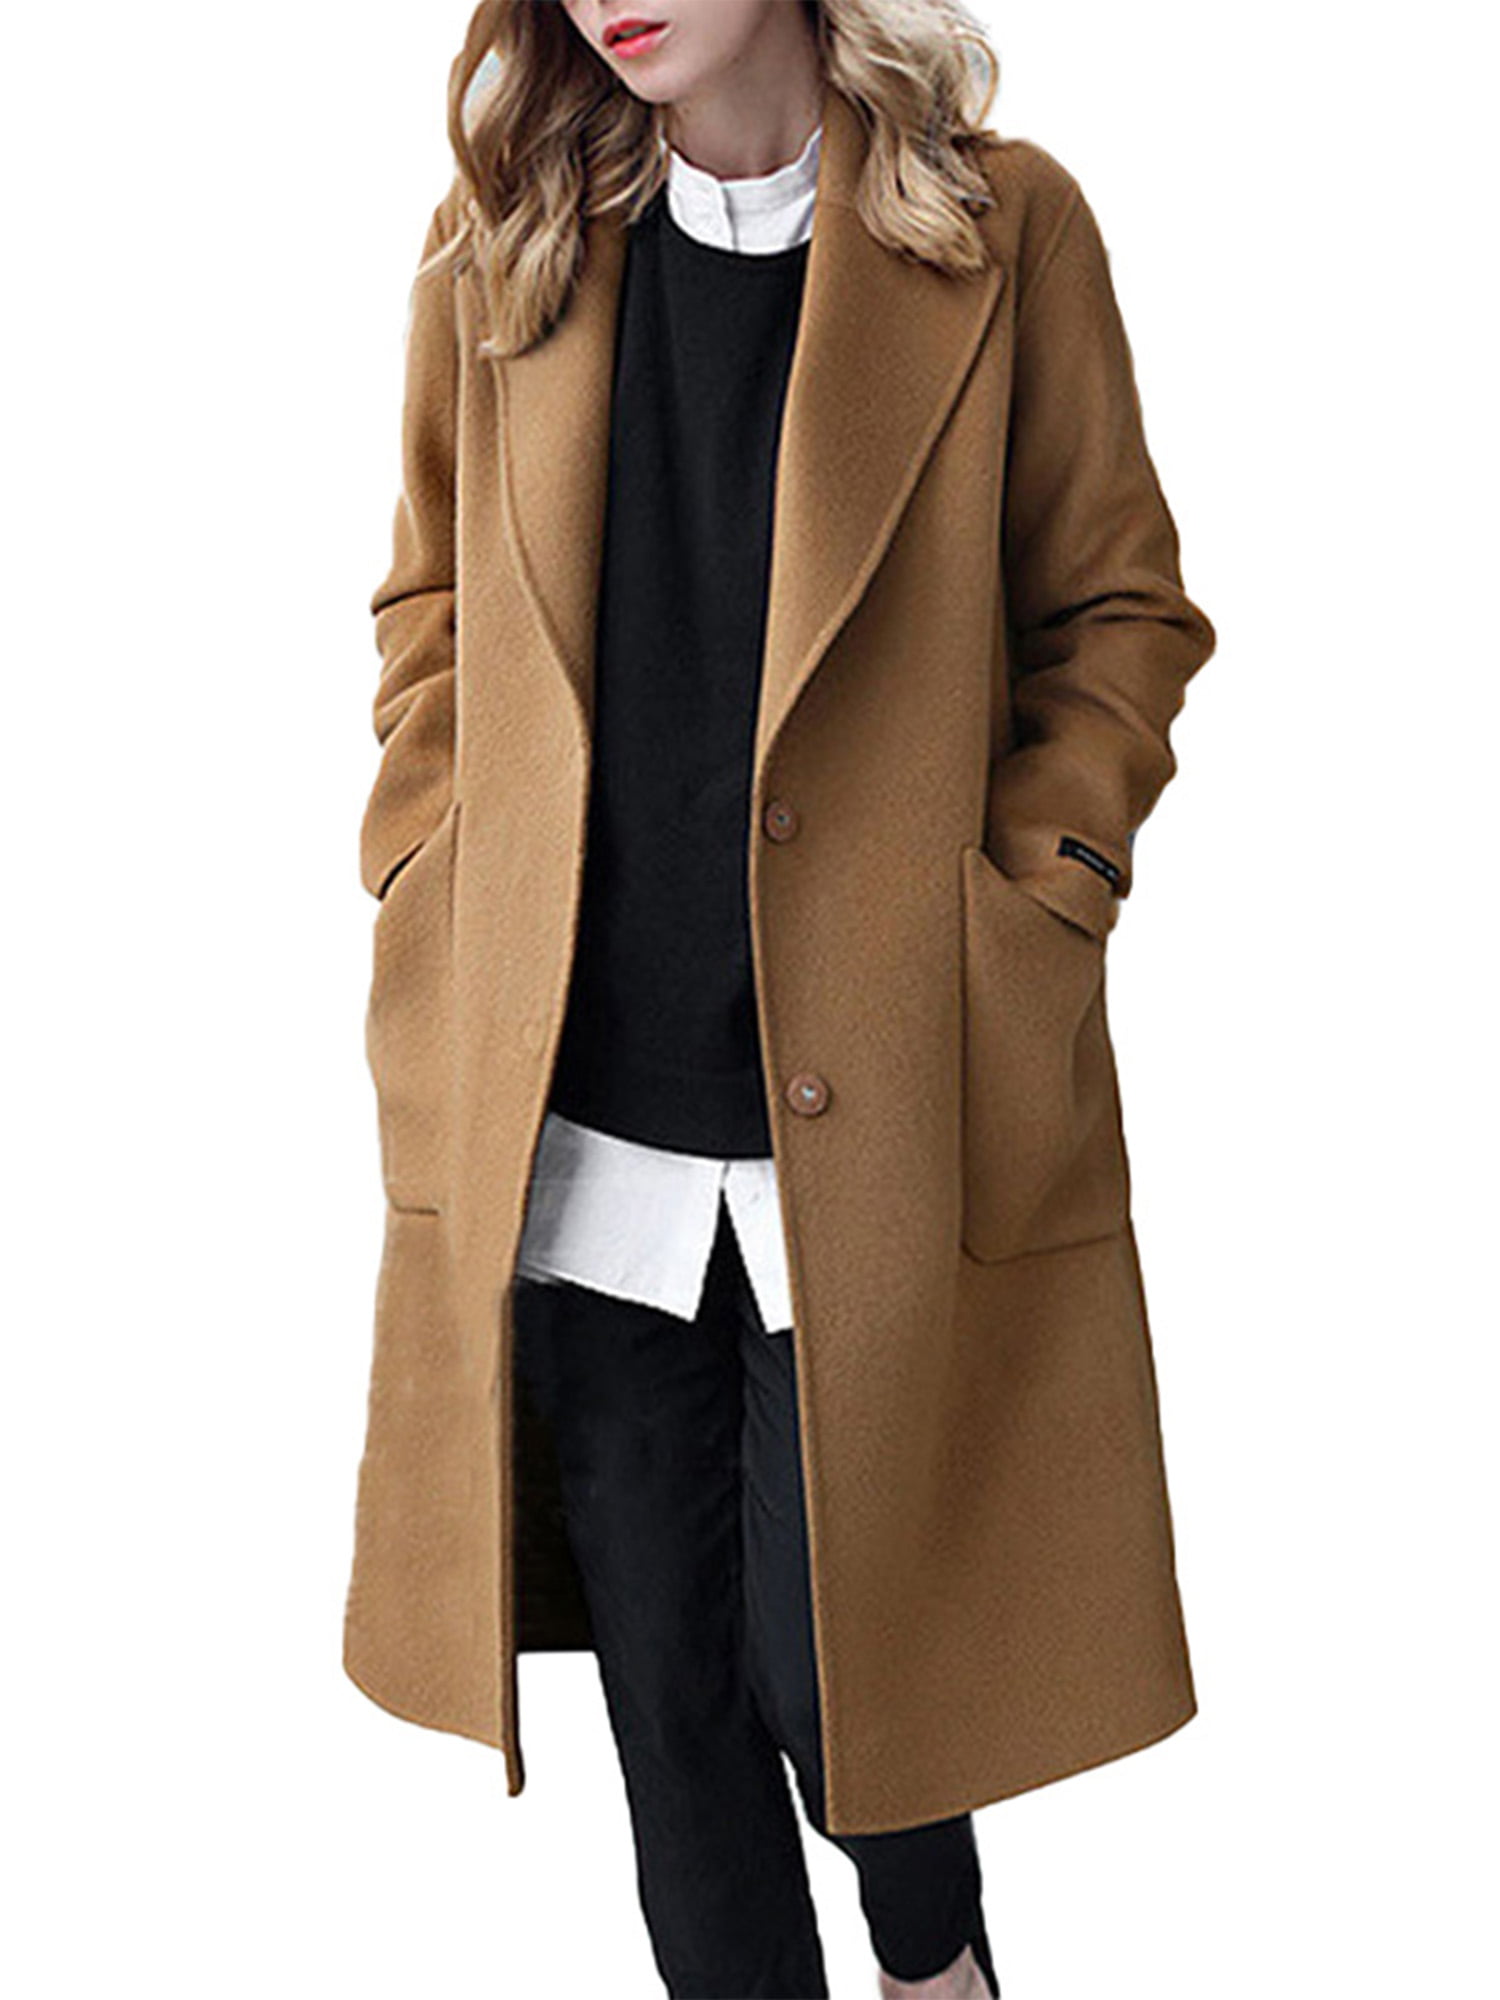 New Thicken Women Coat Long Sleeve Turn-Down Collar Cotton Blend Jacket Casual Outerwear